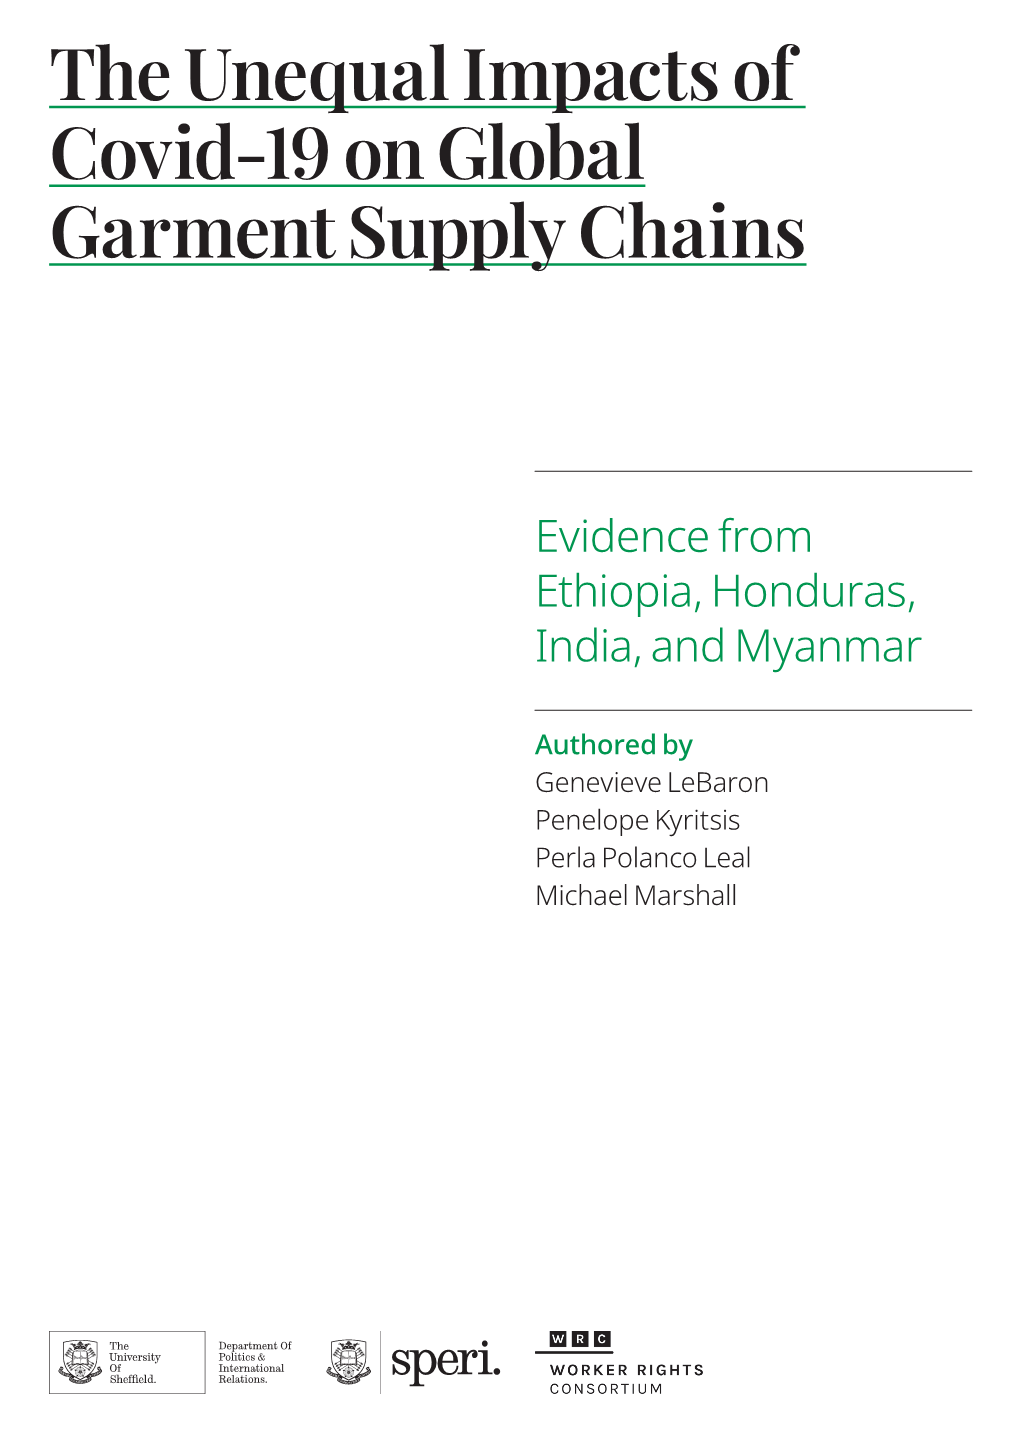 The Unequal Impacts of Covid-19 on Global Garment Supply Chains